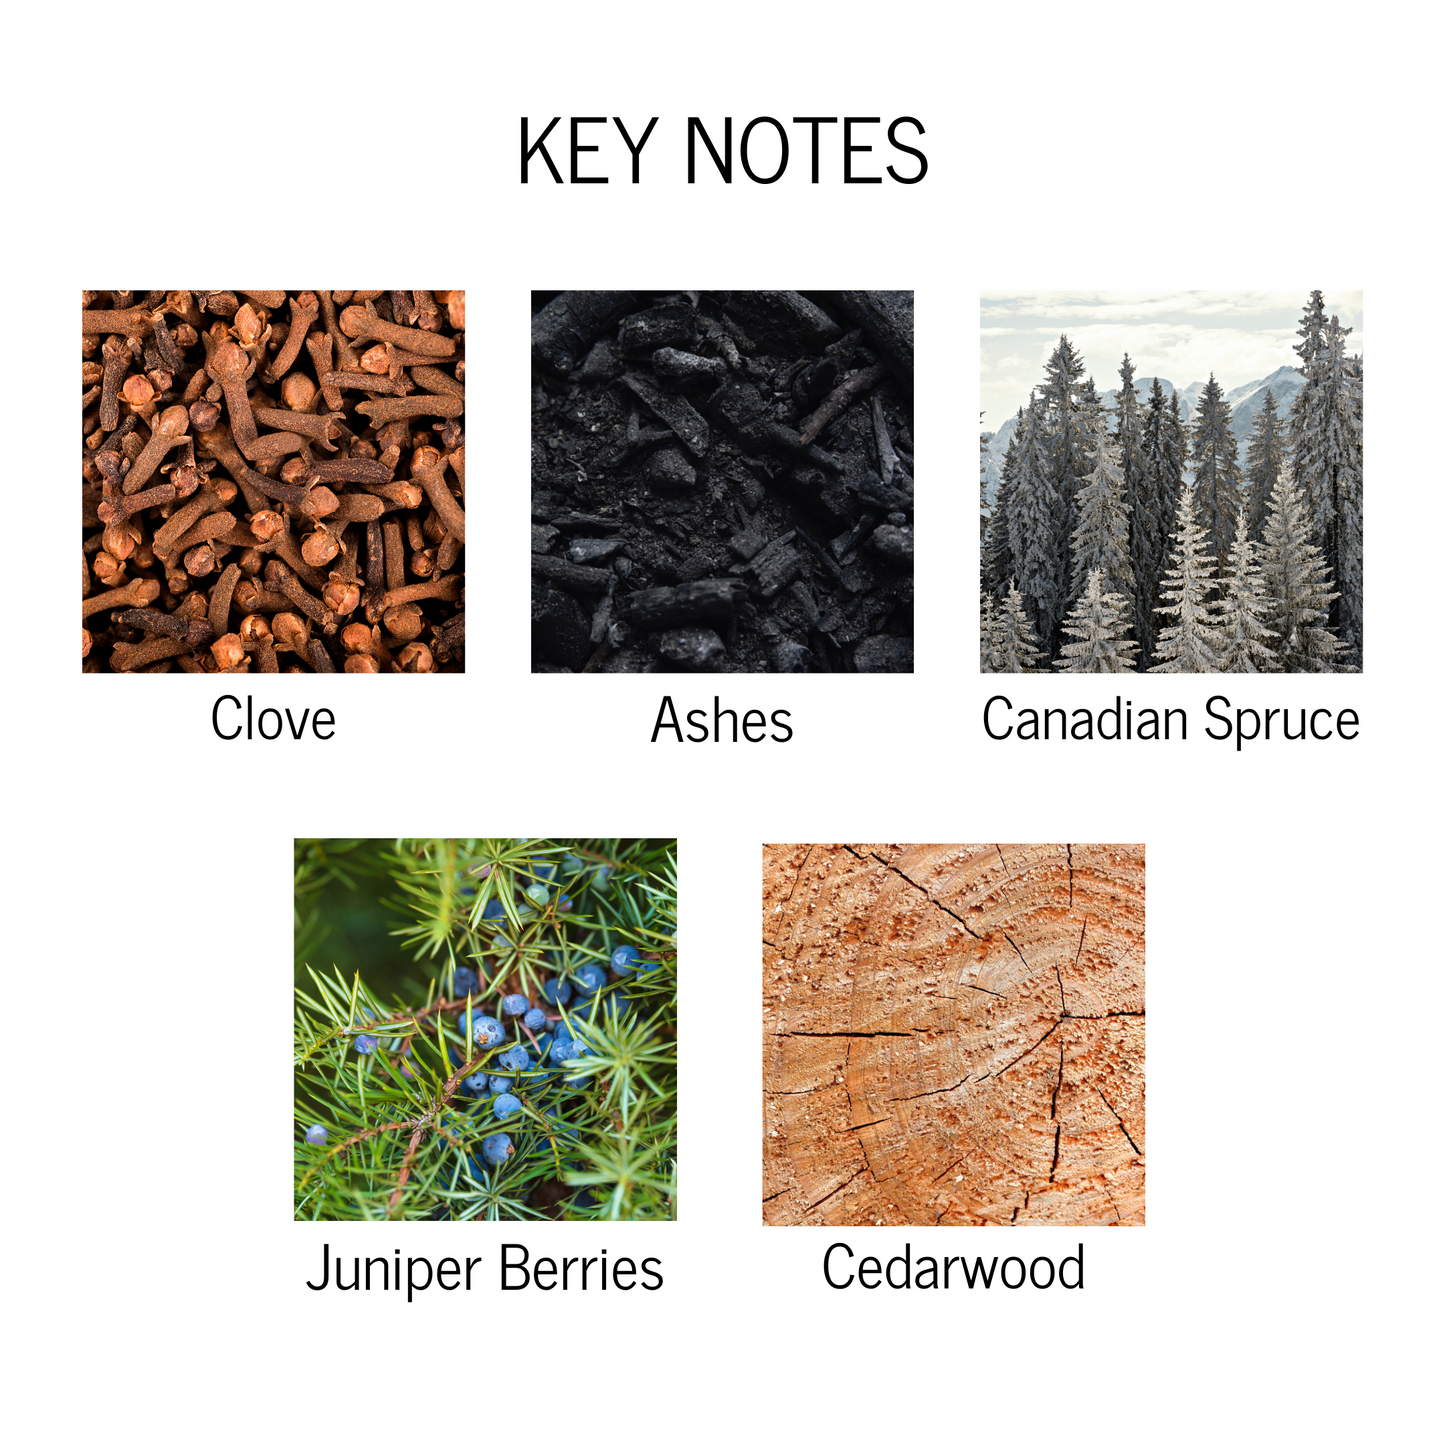 Key notes of clove, ashes, Canadian spruce, juniper berries and cedarwood.